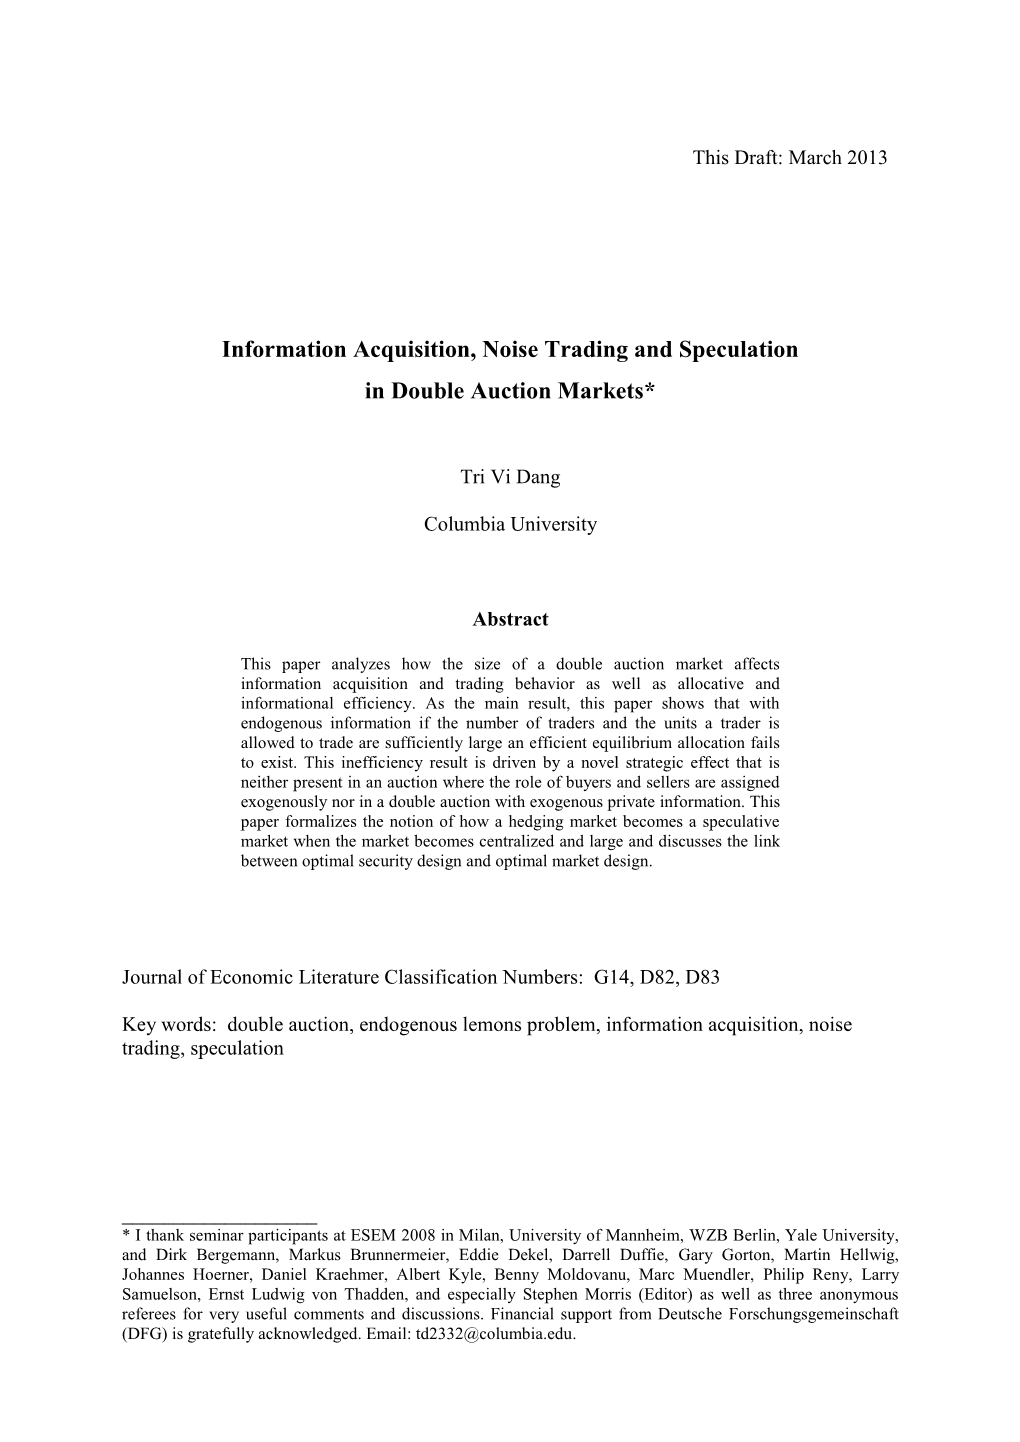 Information Acquisition, Noise Trading and Speculation in Double Auction Markets*